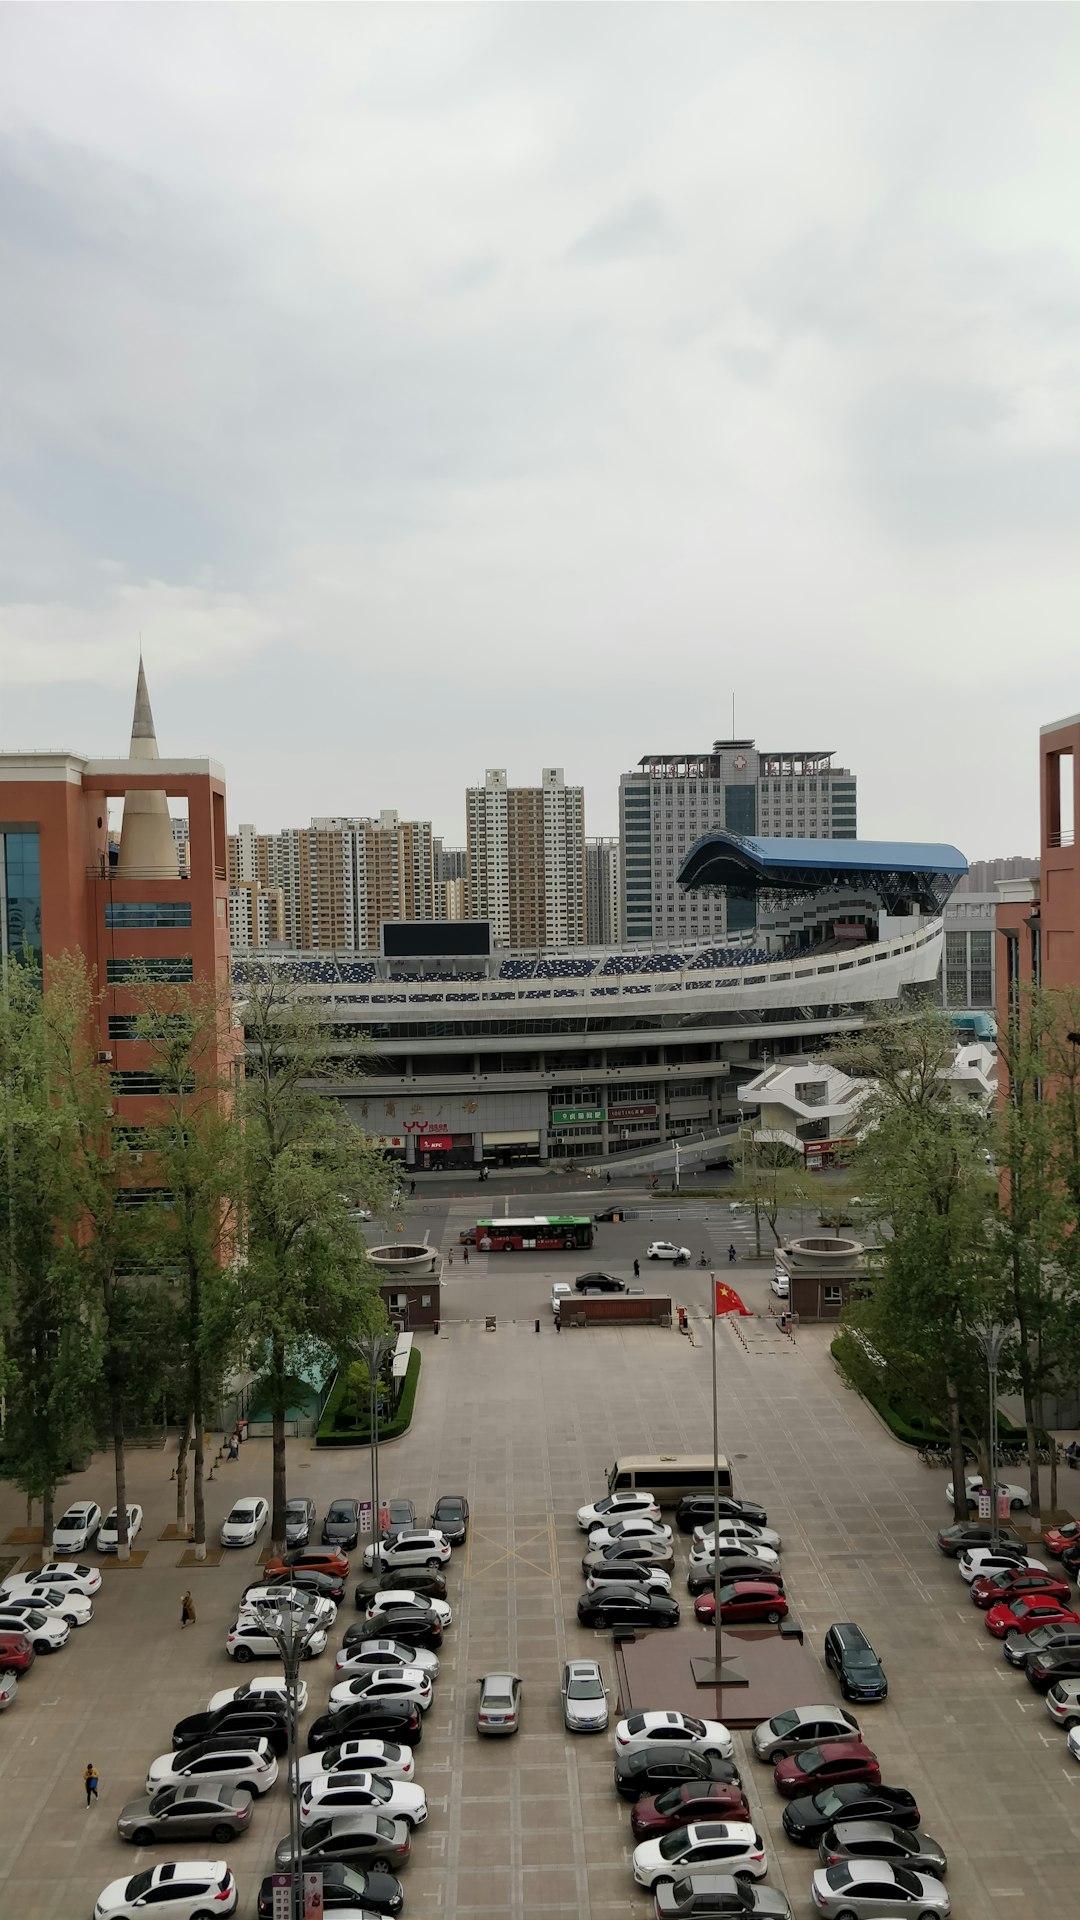 Travel Tips and Stories of Hebei Medical University in China